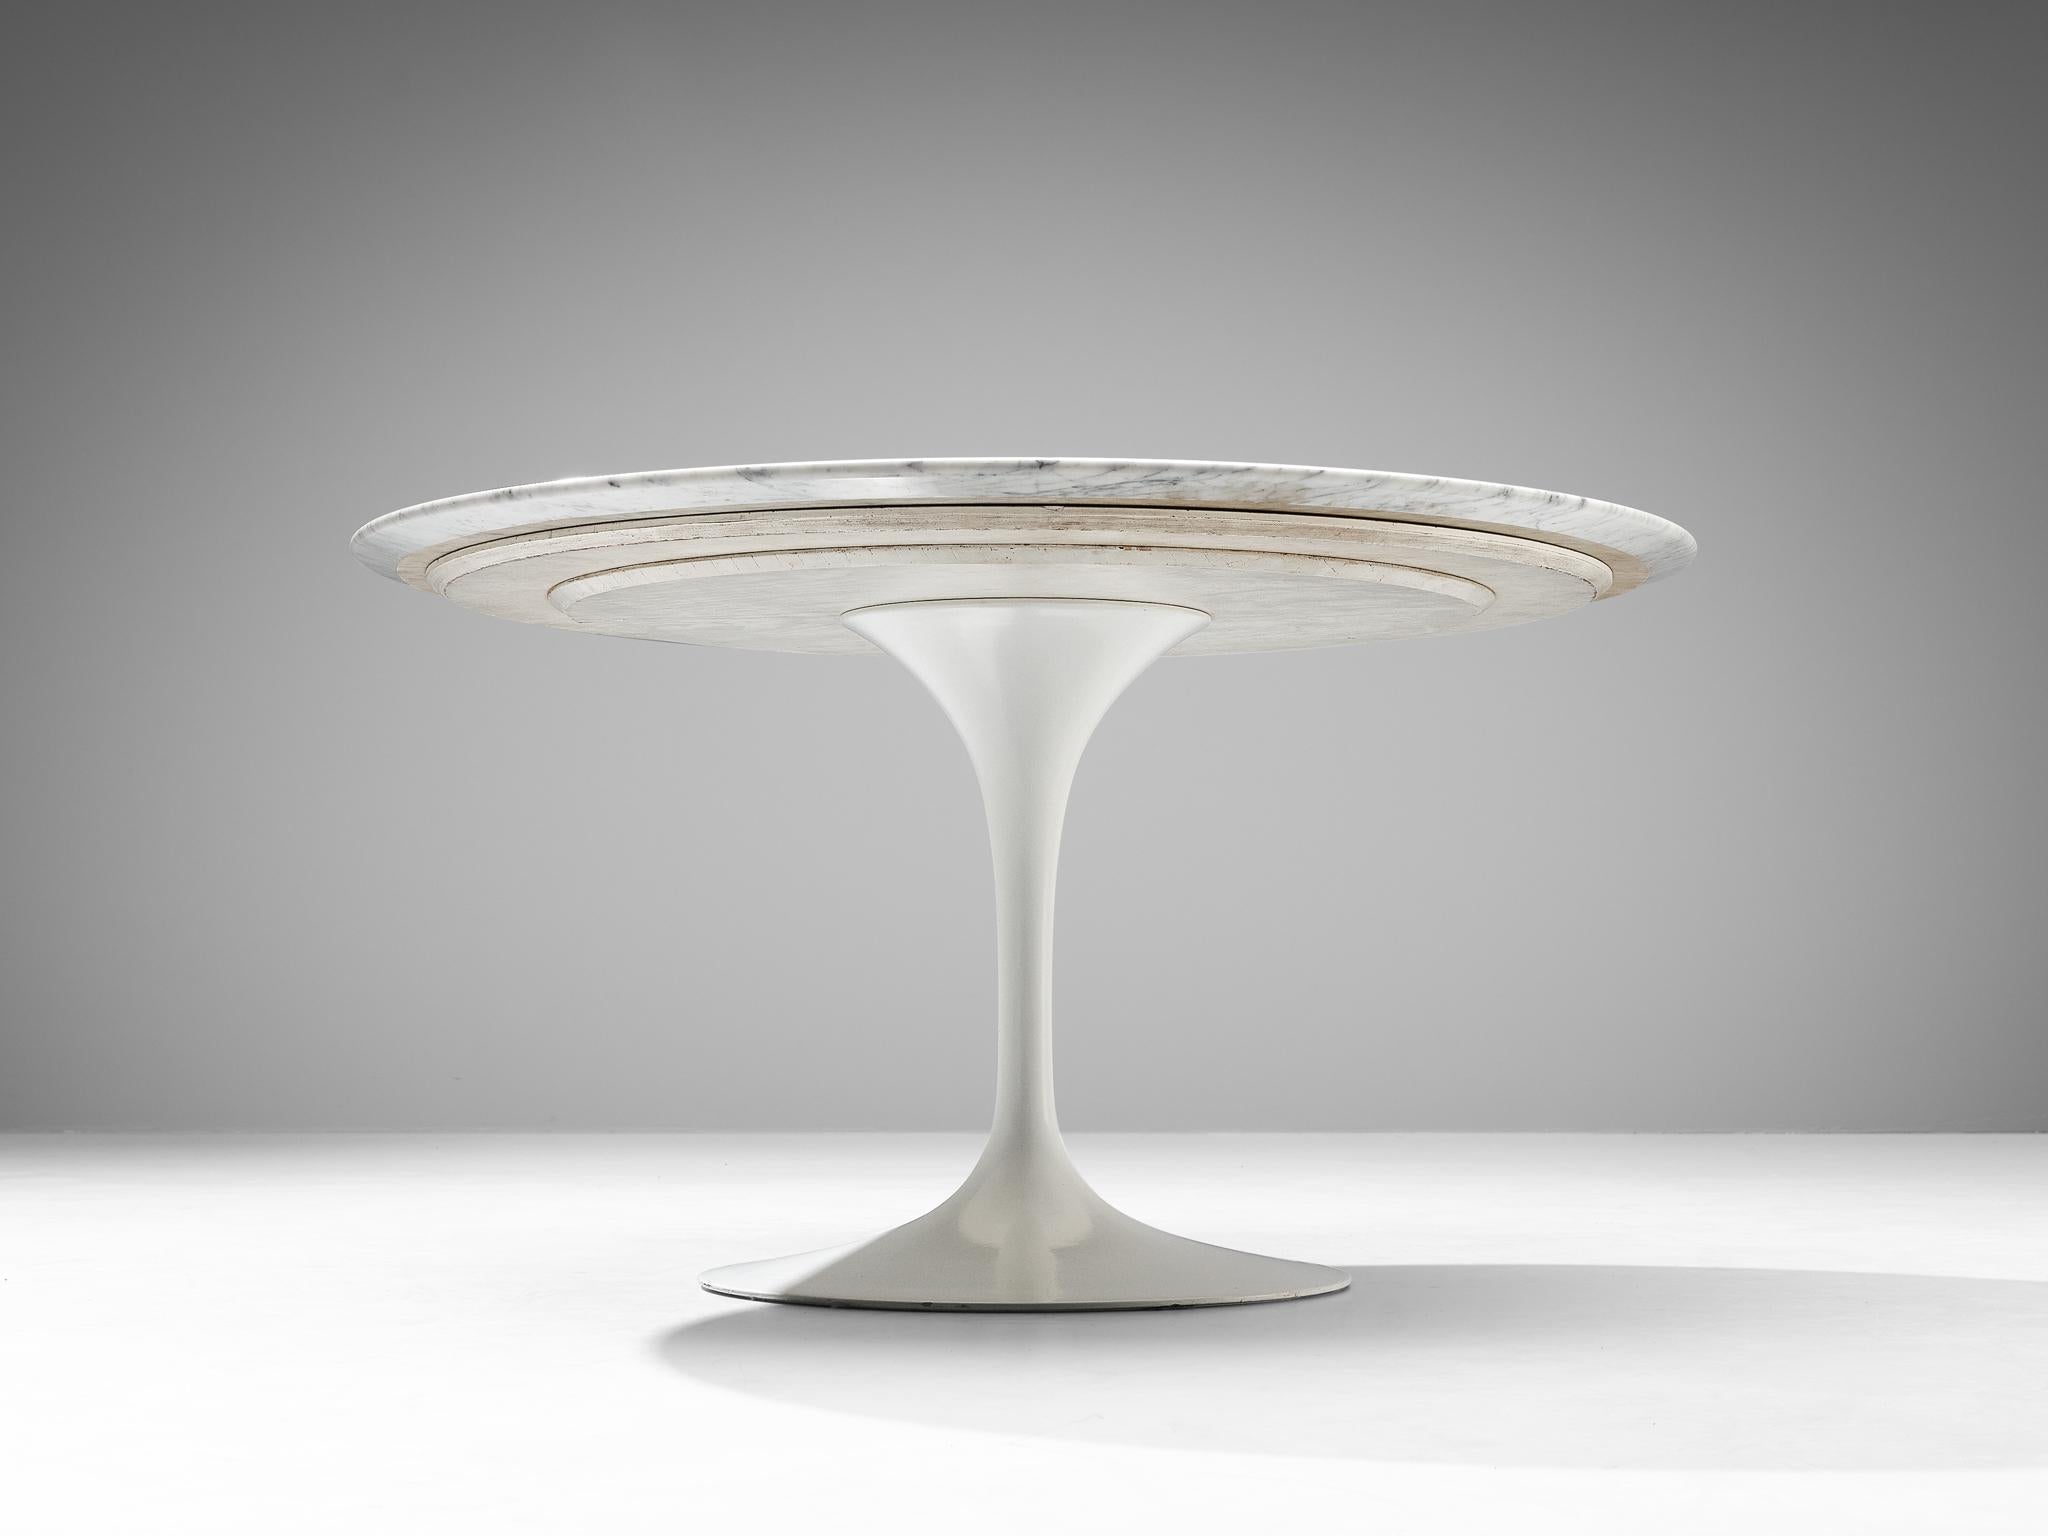 American Eero Saarinen for Knoll 'Tulip' Dining Table with Carrara Marble Top  For Sale